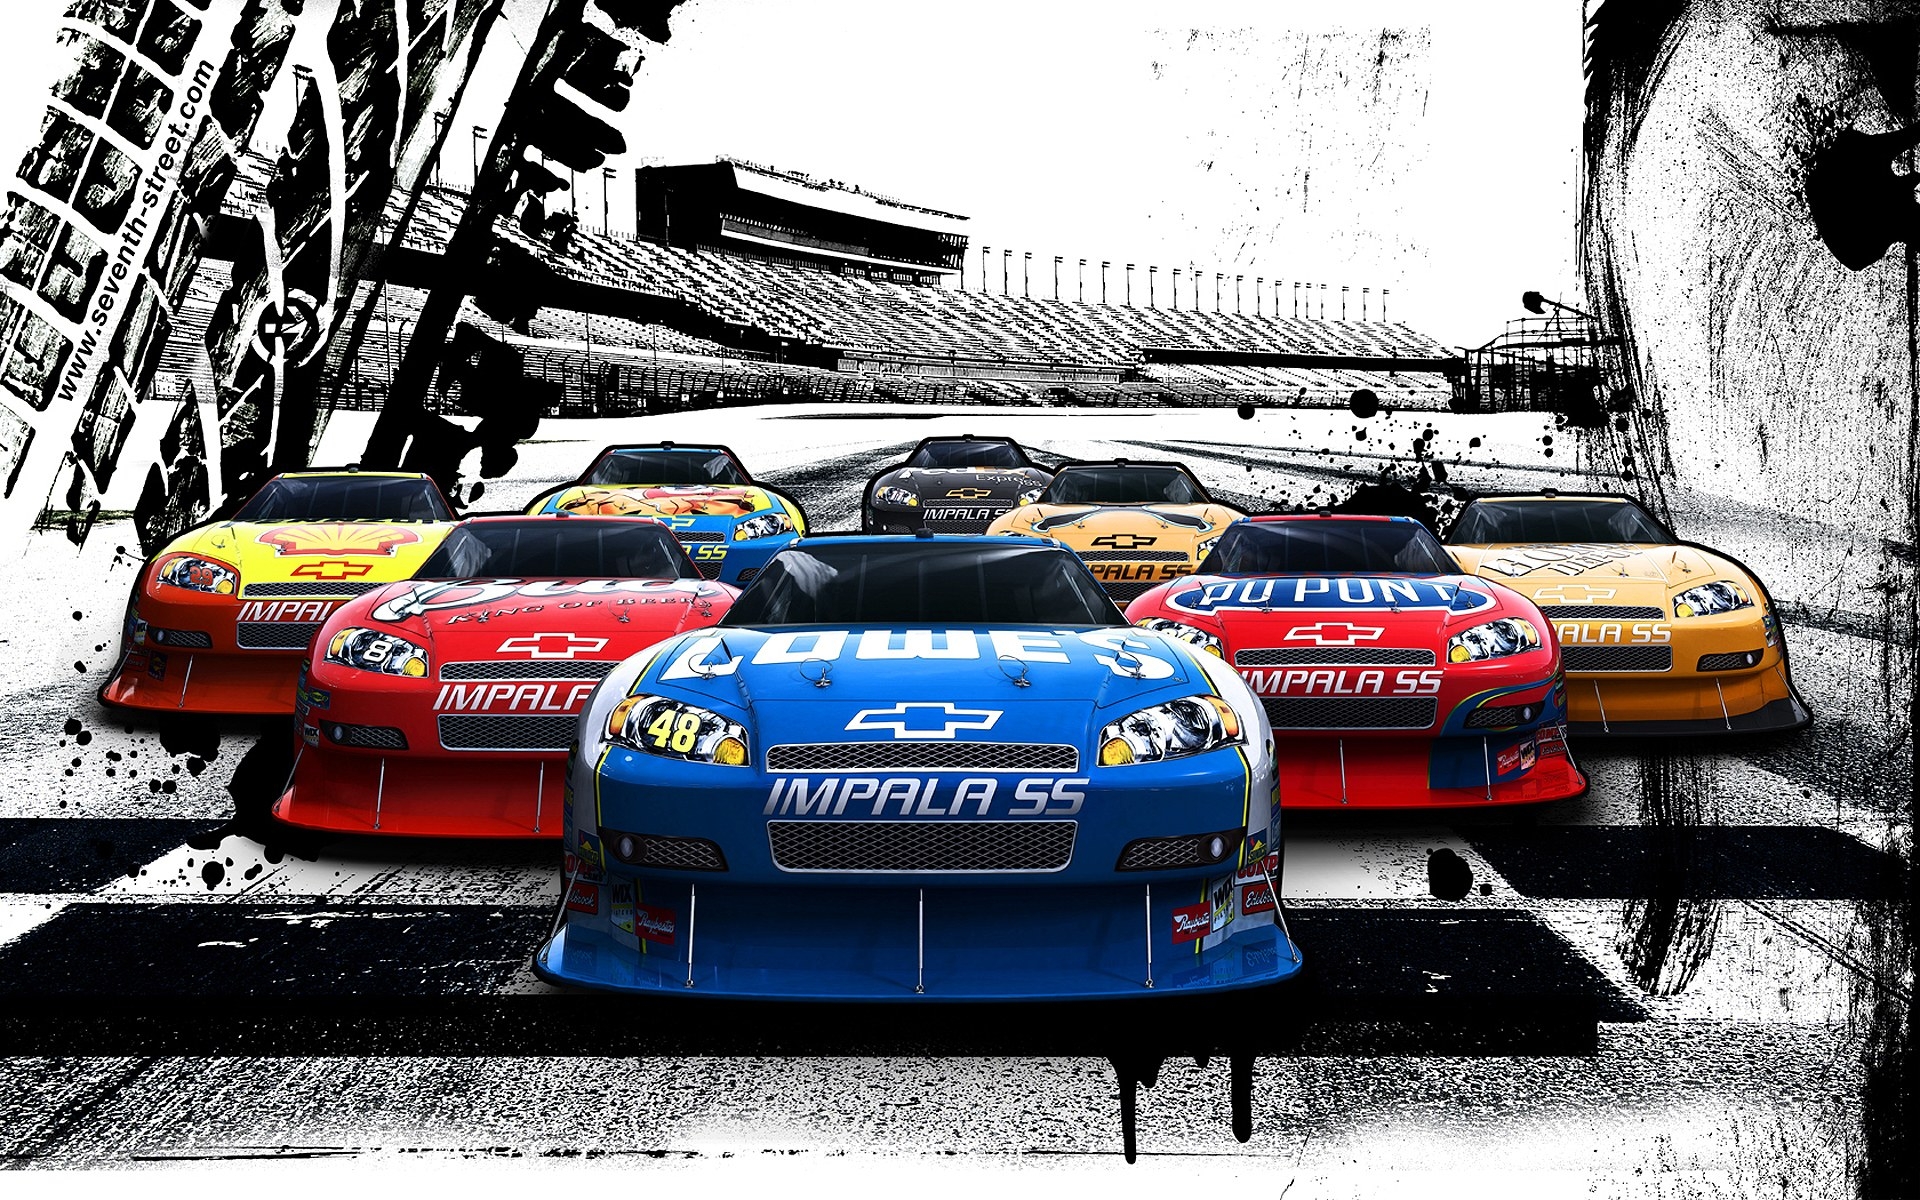 468 Nice Nascar heat 22 car phone wallpaper for Collection